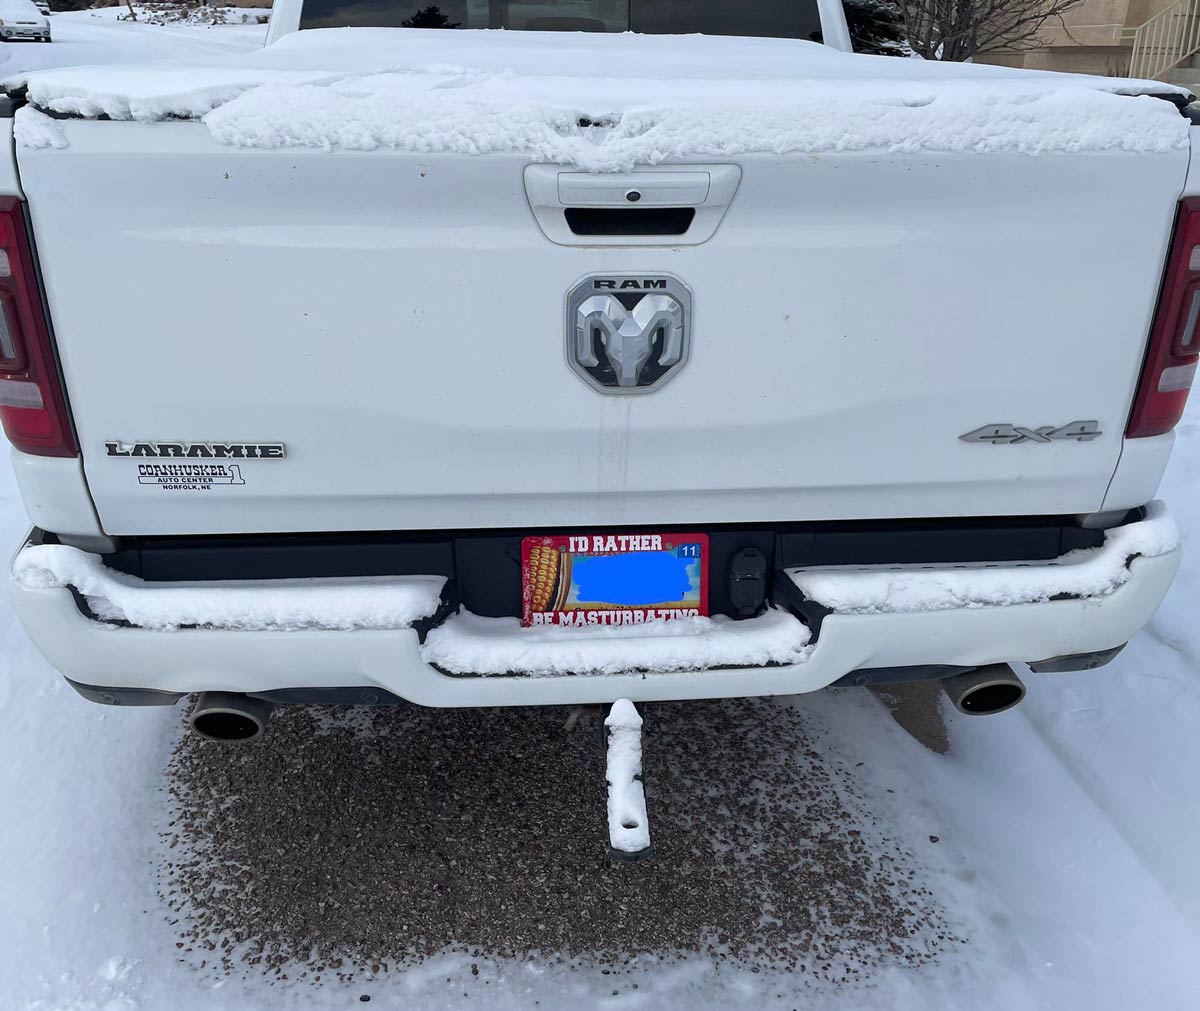 Replaced my brother’s license plate frame as a surprise late Christmas gift